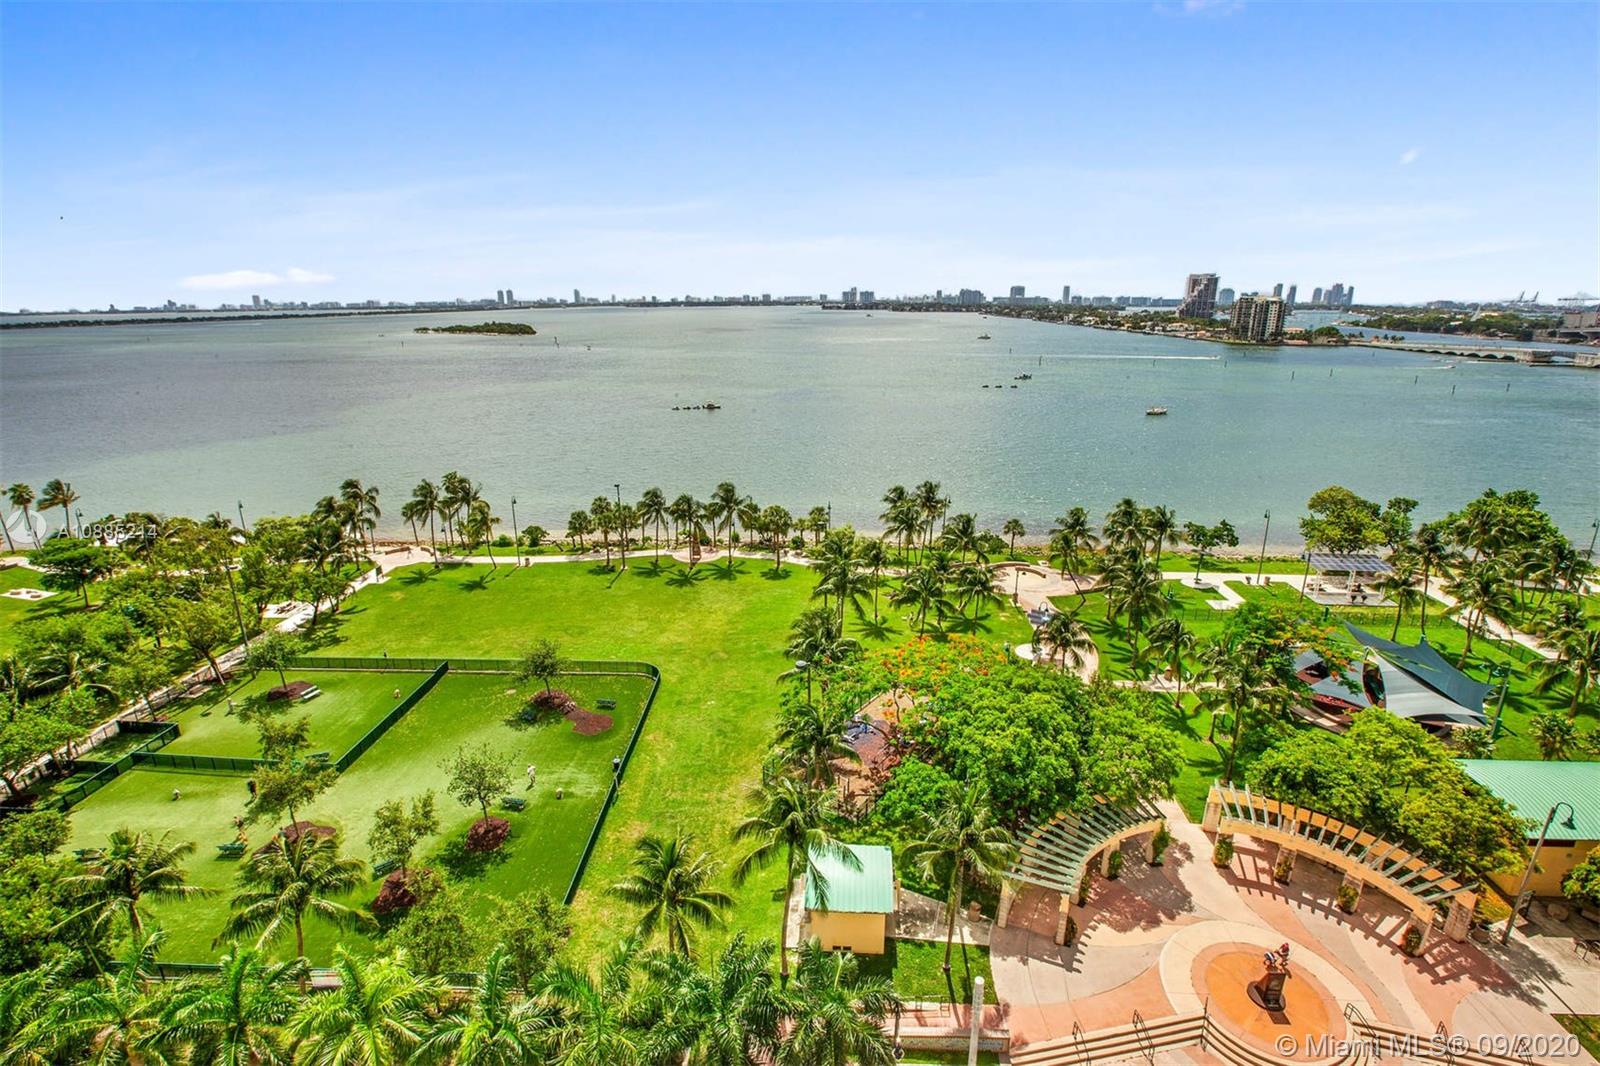 Enjoy the open, beautiful views of the Biscayne bay & park from this spacious & renovated 3 BD /3 BA corner unit. Professionally designed by Brazilian architect Fernanda Negrelli. The open kitchen, LR & den are integrated spaces. Inspired by French & Chinese architecture you will see handcrafted wood window panels on the walls, amongst many more design details. Abundant amount of natural lighting flows through the apartment as the living room has breathtaking views of Biscayne Bay. Triple balconies accessed from each bedroom. Amenities include private + valet parking, concierge, pool as well as fitness facilities. This unique apartment us in mint condition and ready to be moved into right away.